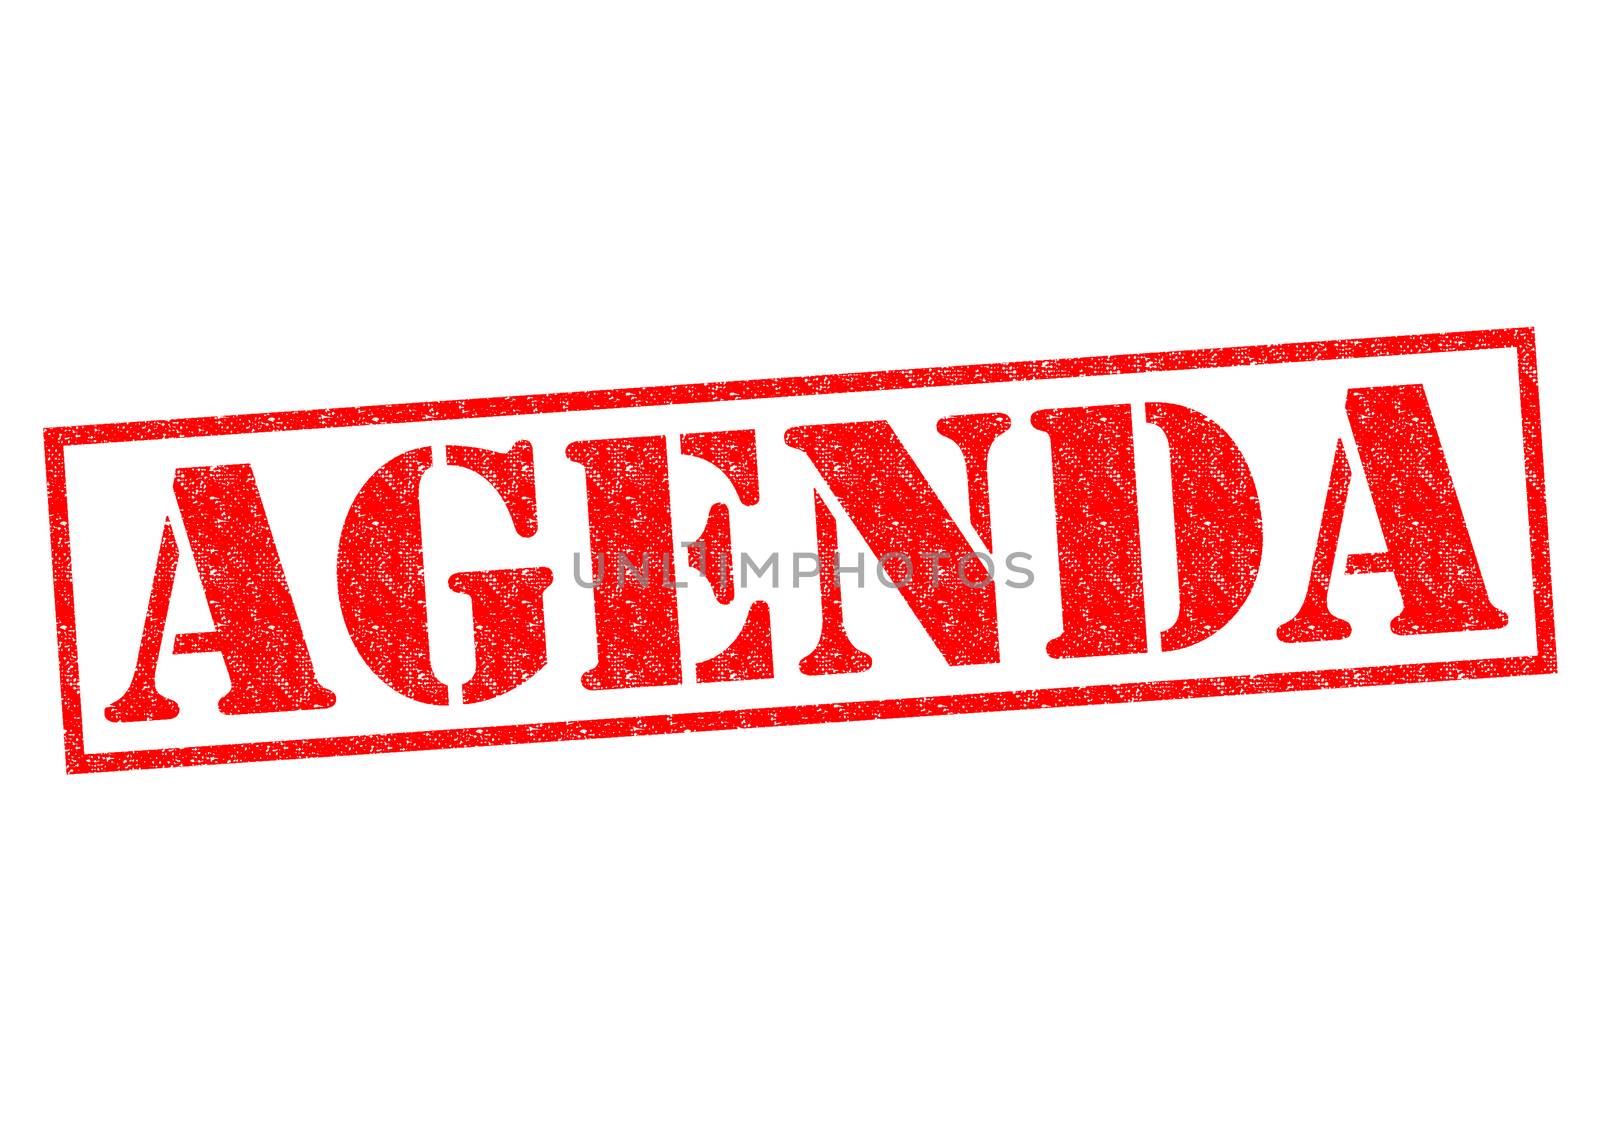 AGENDA red Rubber Stamp over a white background.